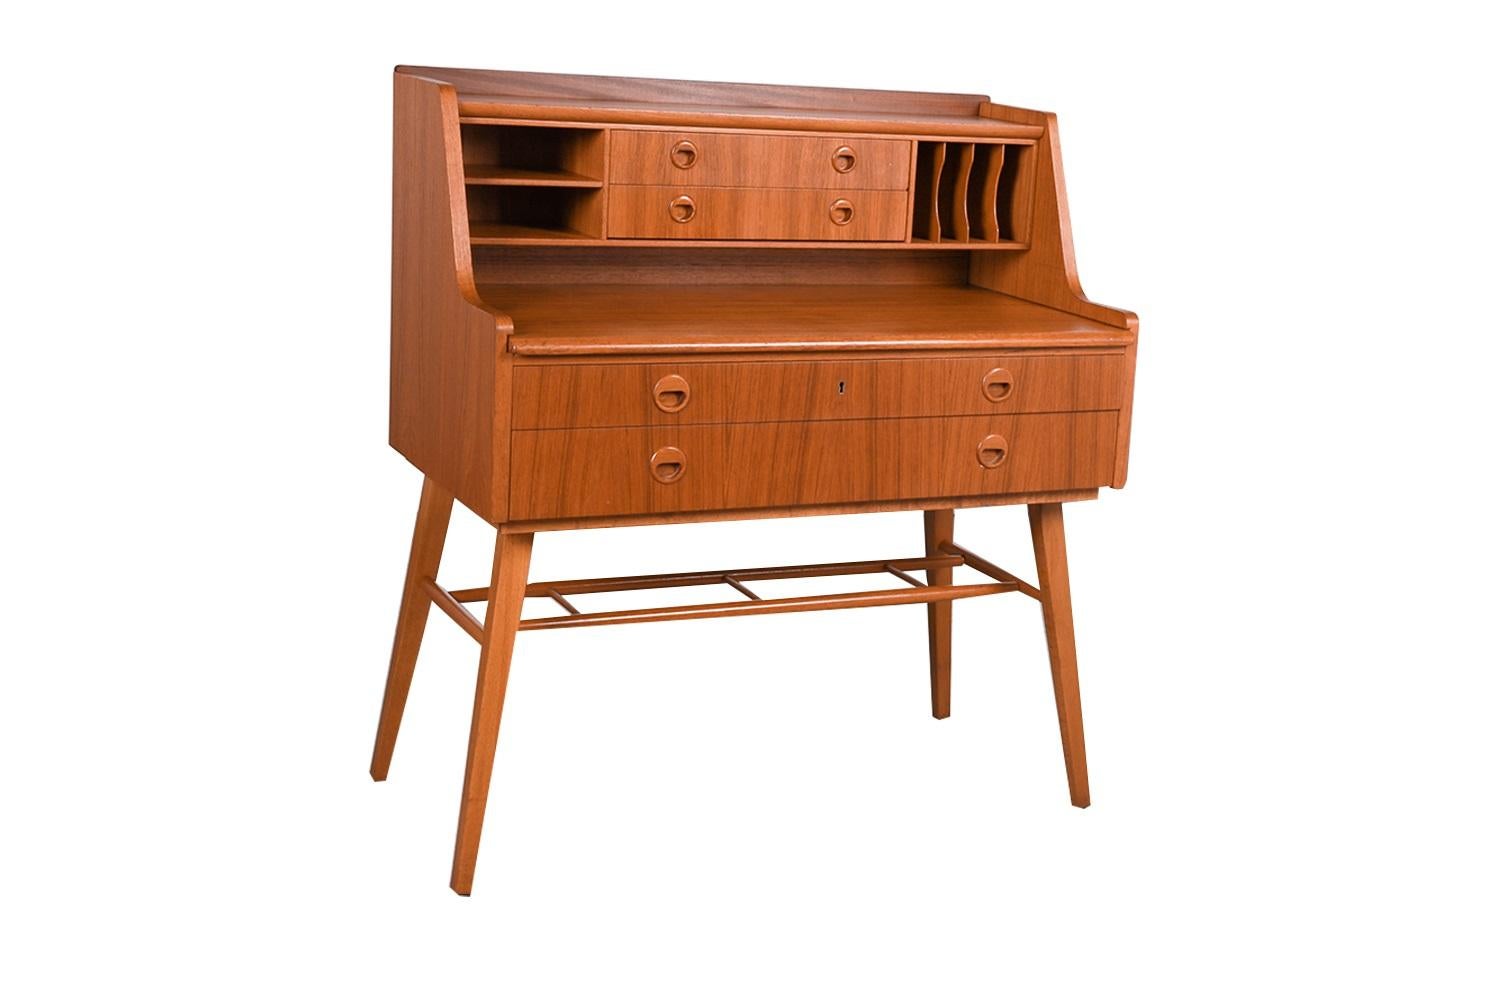 Classic 1960s Mid-Century Modern Scandinavian designed teak secretary desk by AB Bröderna Gustafssons, Sweden. The beautifully shaped contemporary secretary desk is wrapped in a stunning teak veneer featuring upper and lower storage. Two large